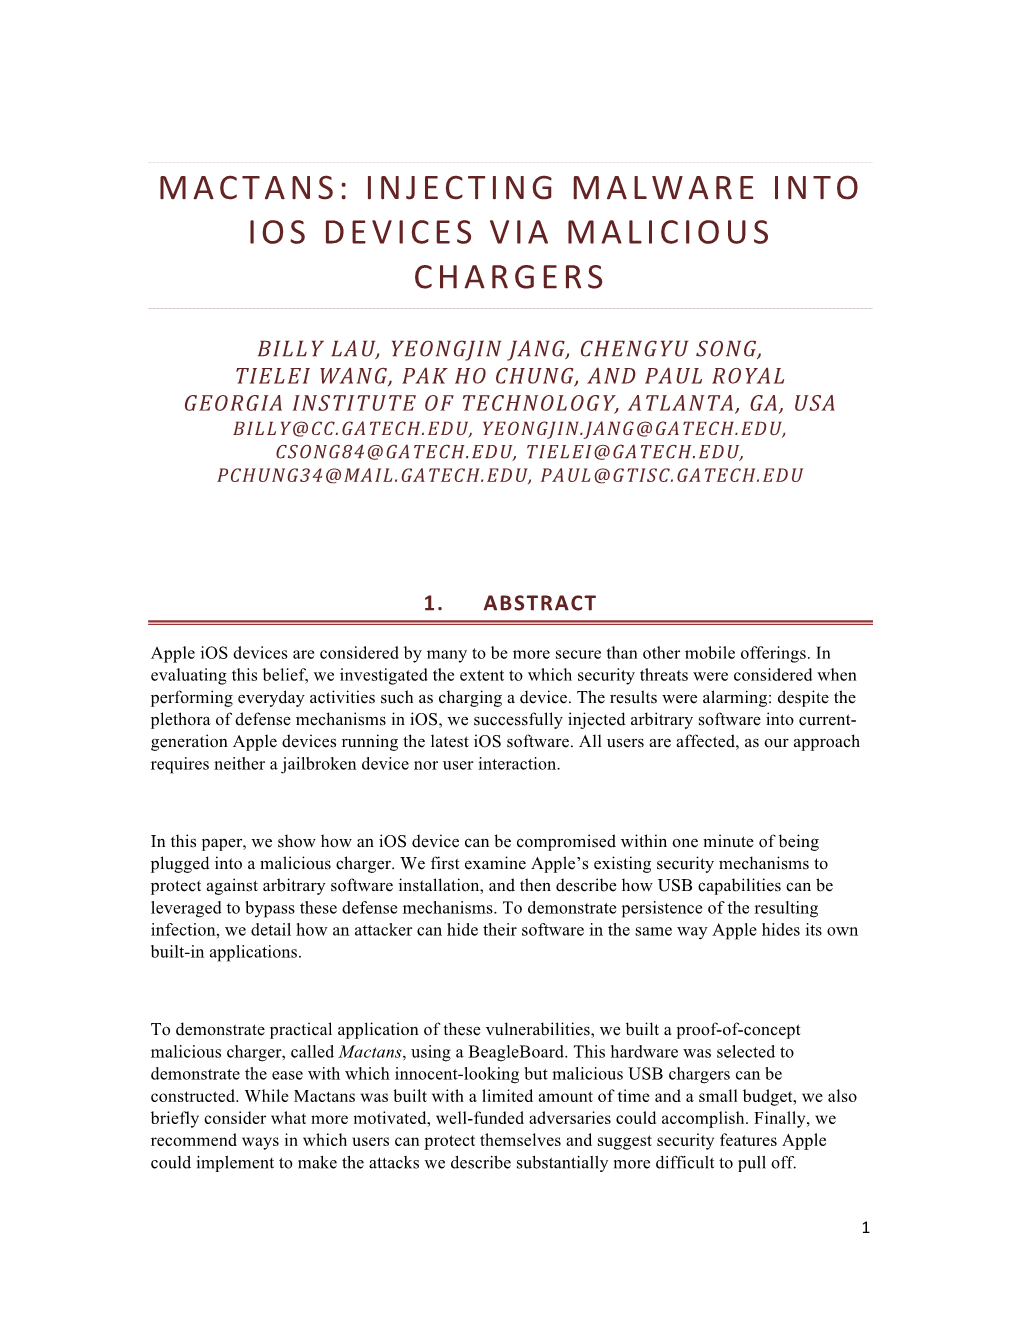 Mactans: Injecting Malware Into Ios Devices Via Malicious Chargers